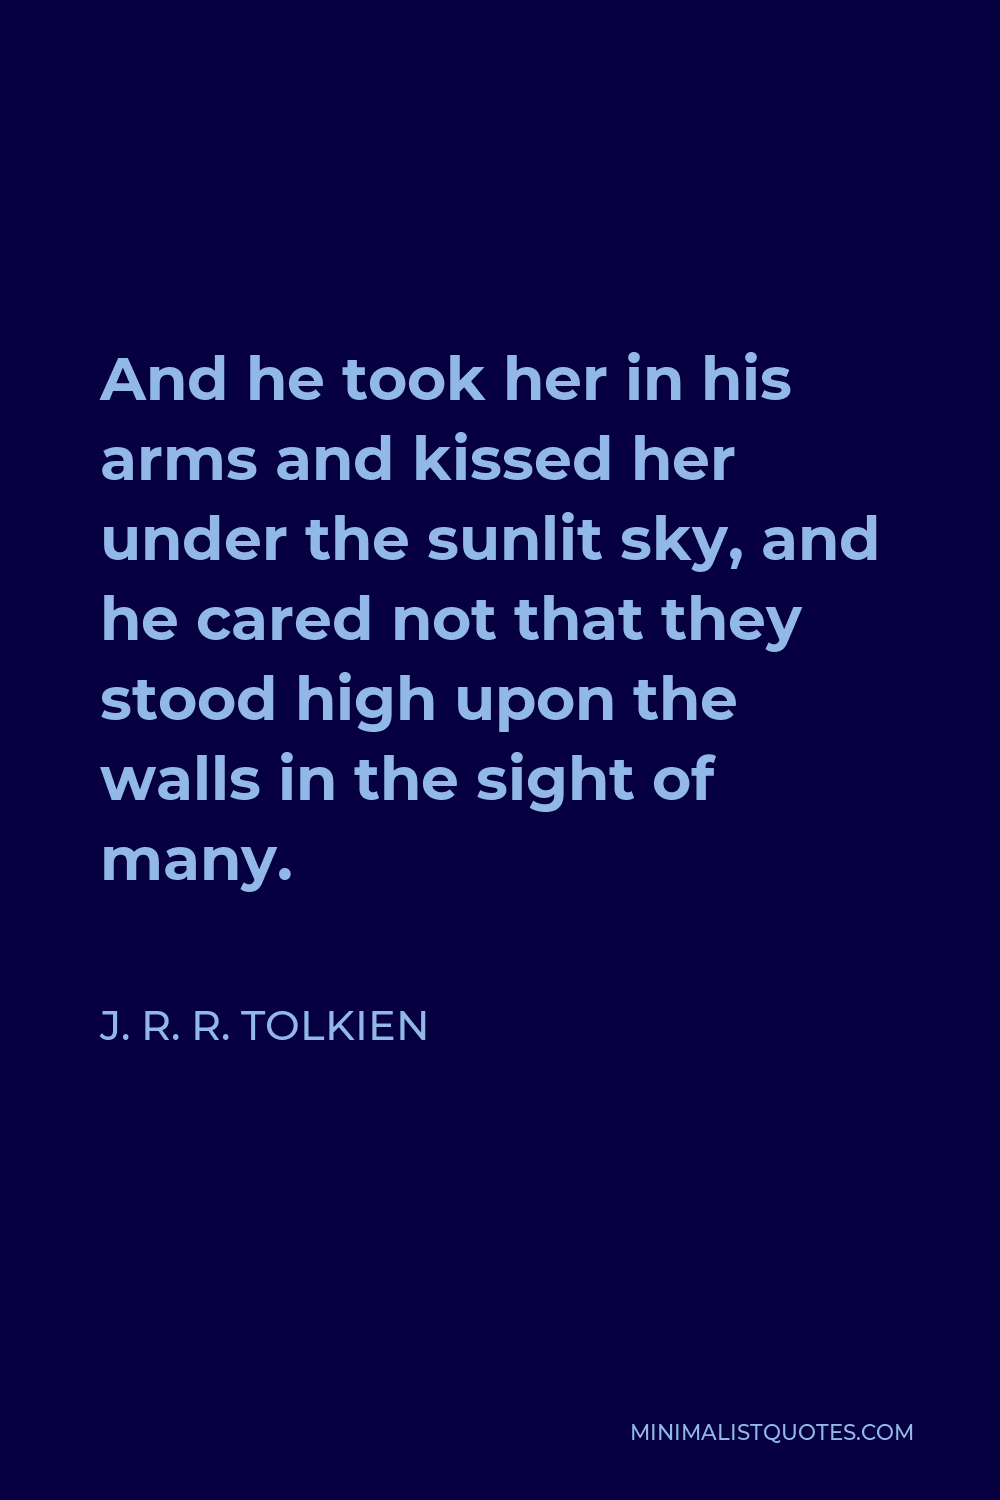 J. R. R. Tolkien Quote - And he took her in his arms and kissed her under the sunlit sky, and he cared not that they stood high upon the walls in the sight of many.